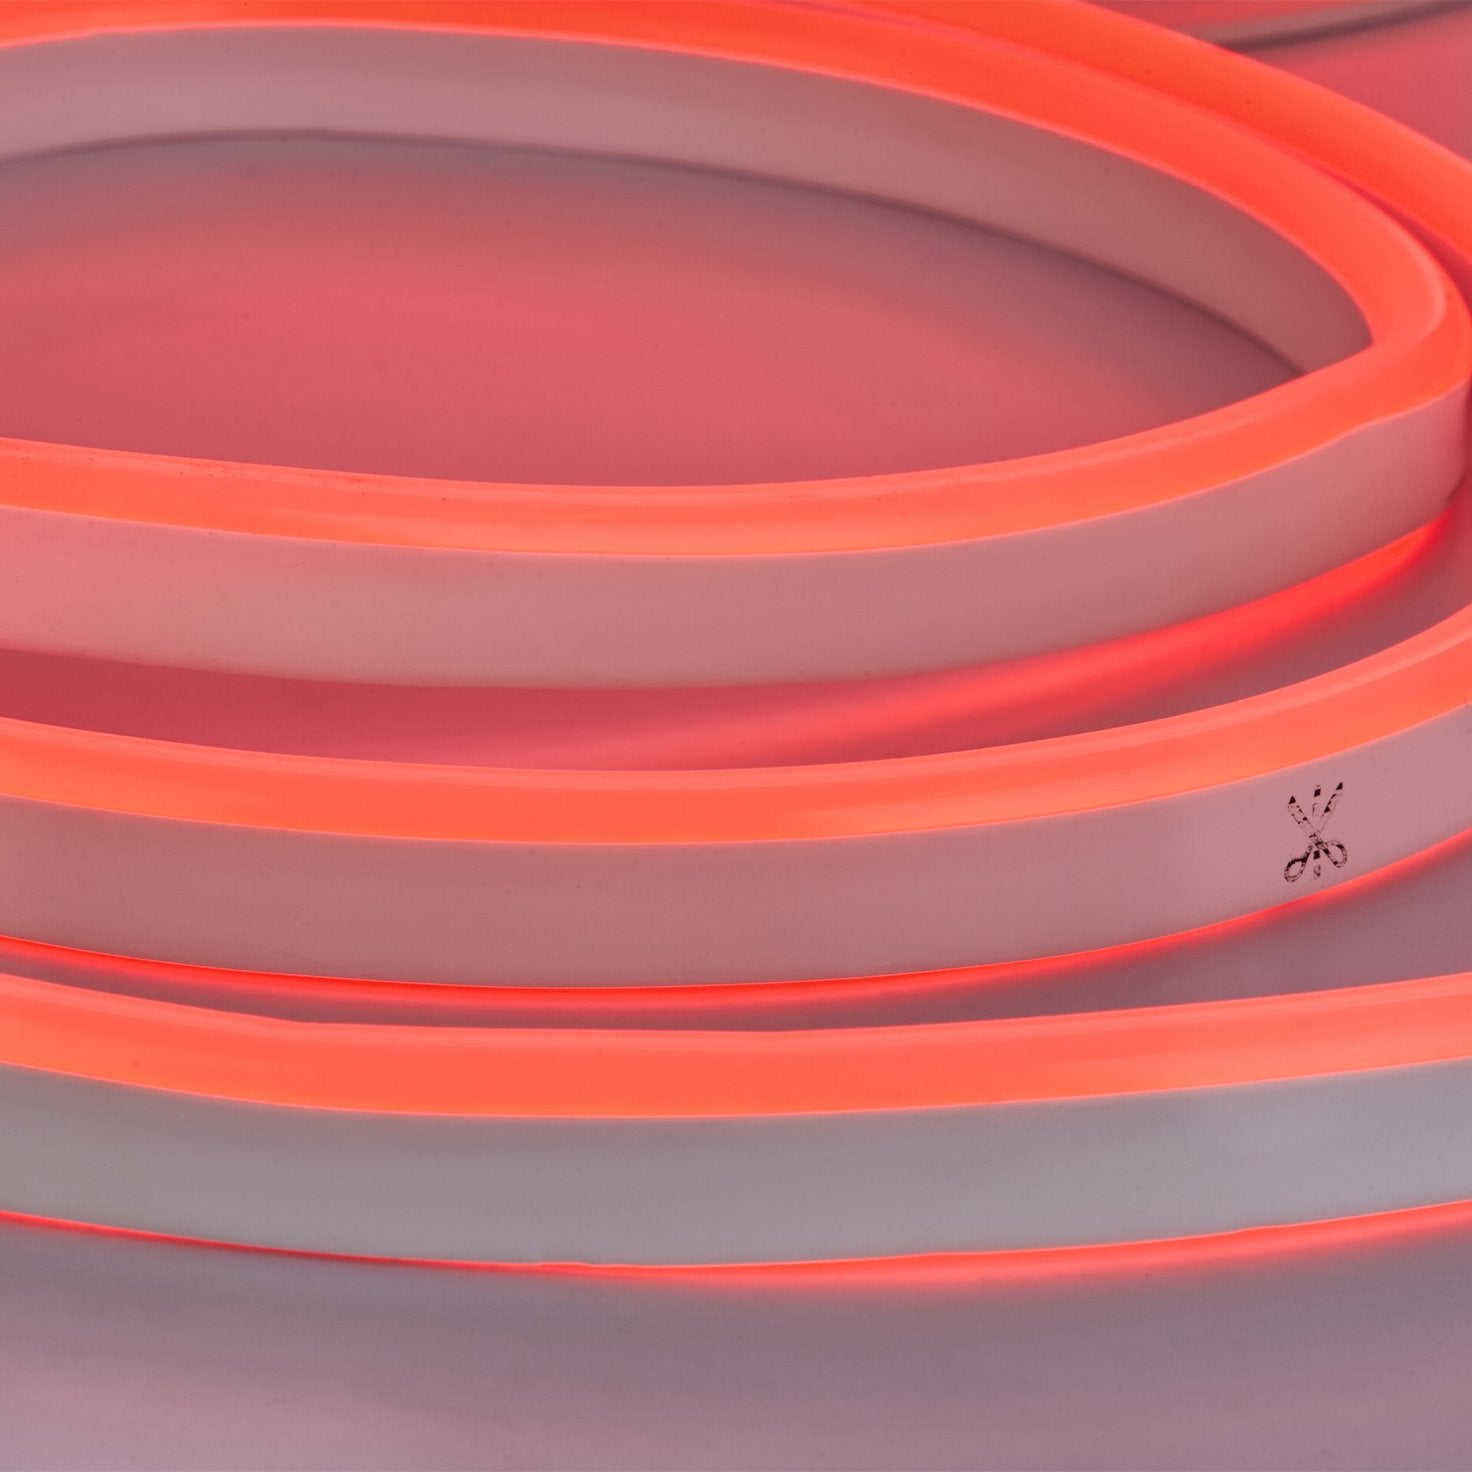 LED Neon Rope Light | Type D | 7.7 Watt per Meter | 50 Feet | Red Color | UL Listed | IP67 | Flexible Neon Rope Light - Nothing But LEDs